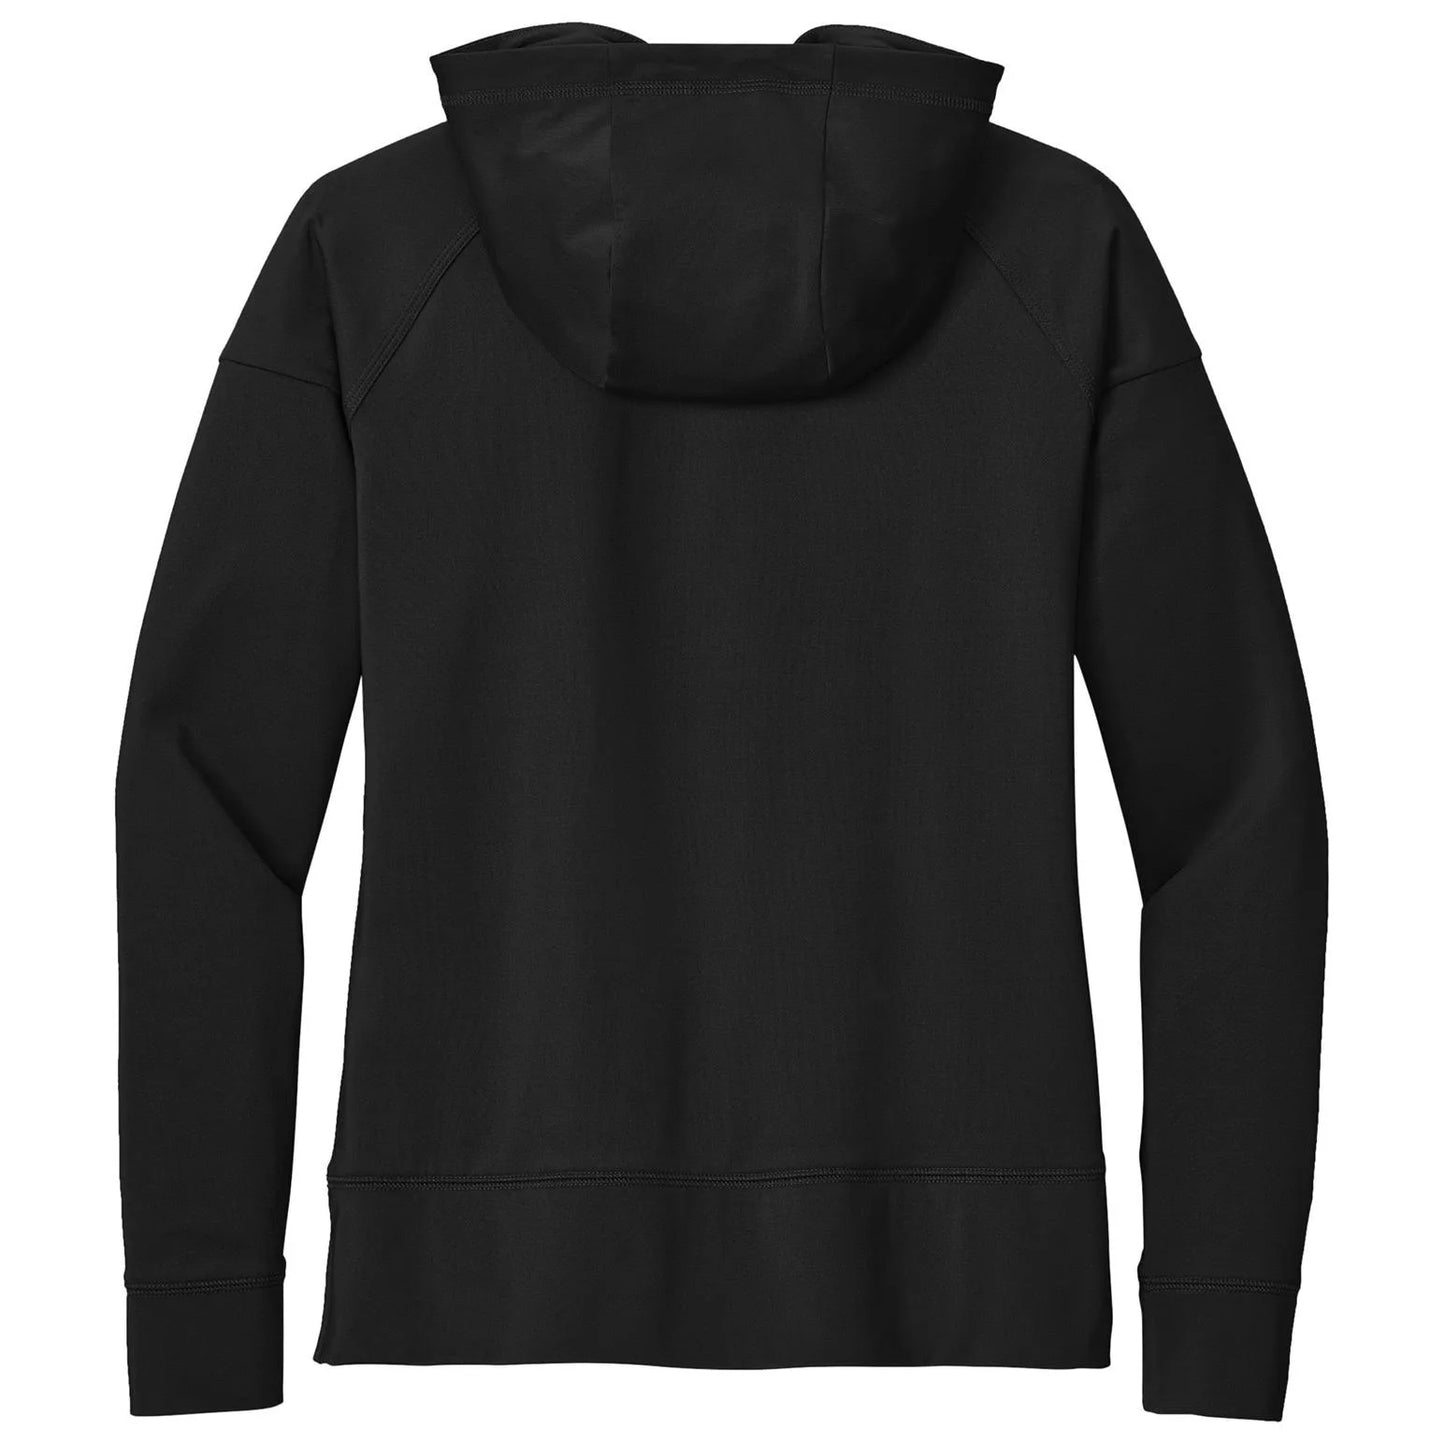 Running is My Therapy 1/4 Zip Performance Hoodie